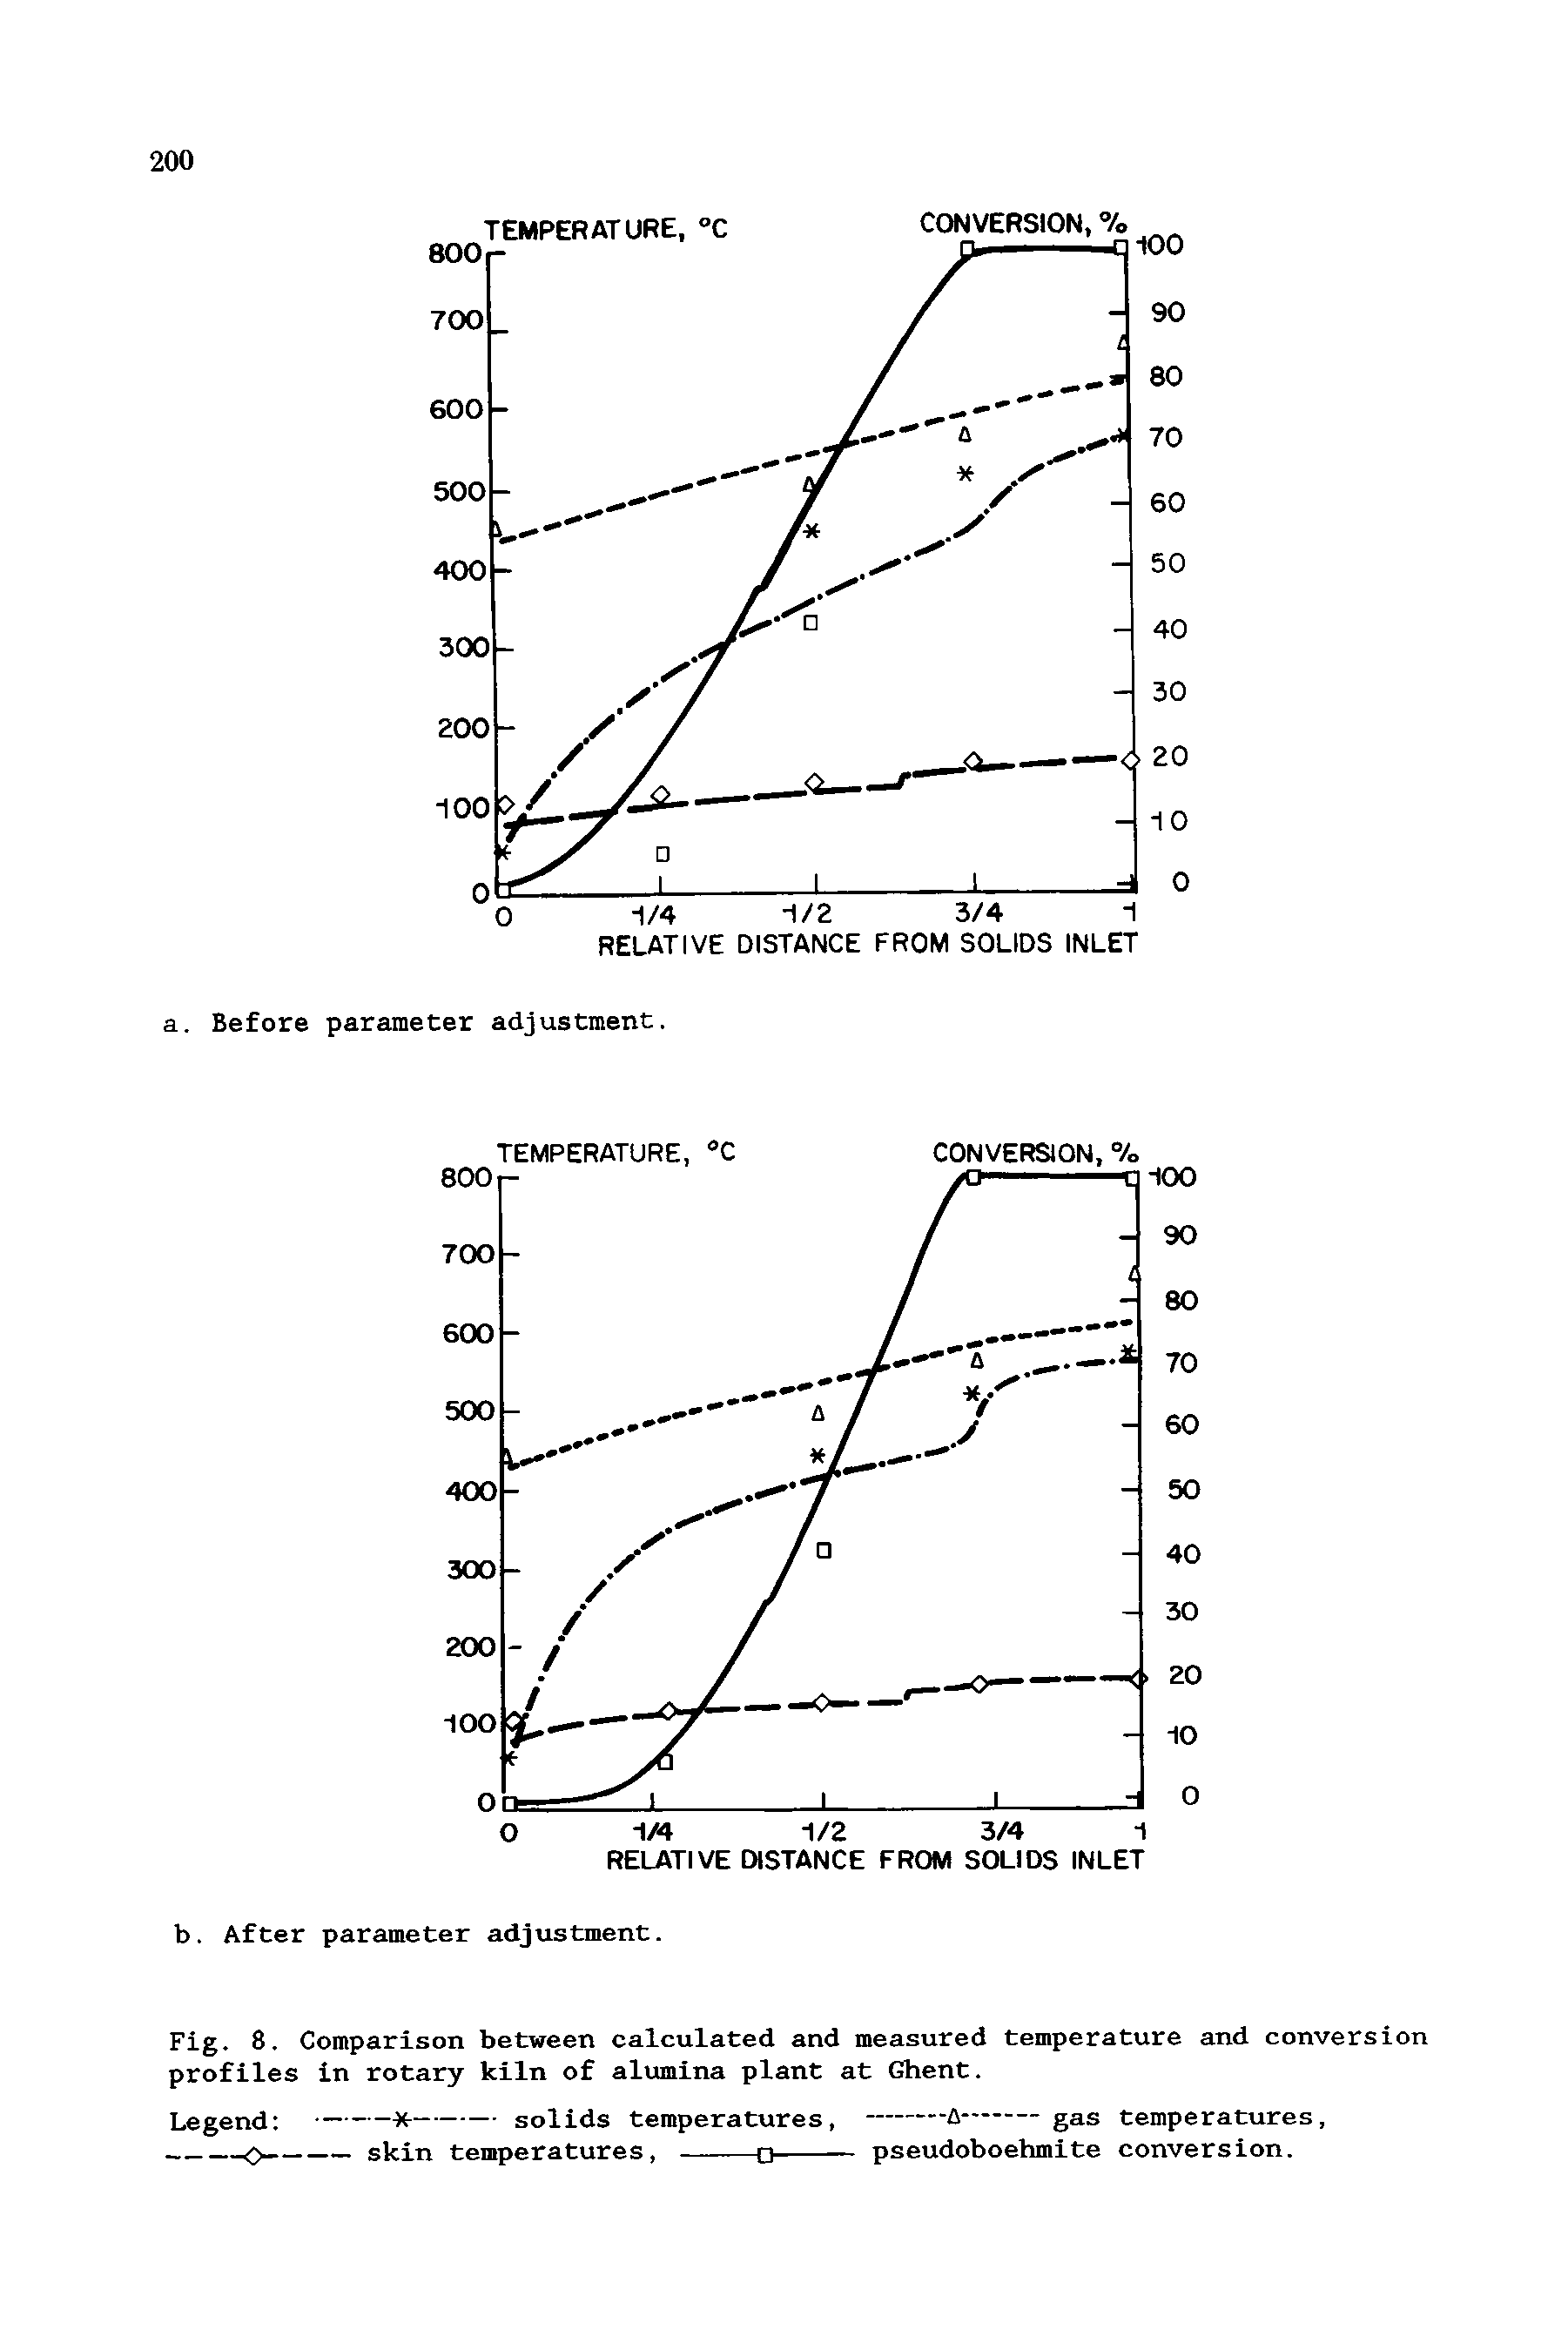 Fig. 8. Comparison between calculated and measured temperature and conversion profiles in rotary kiln of alumina plant at Ghent.